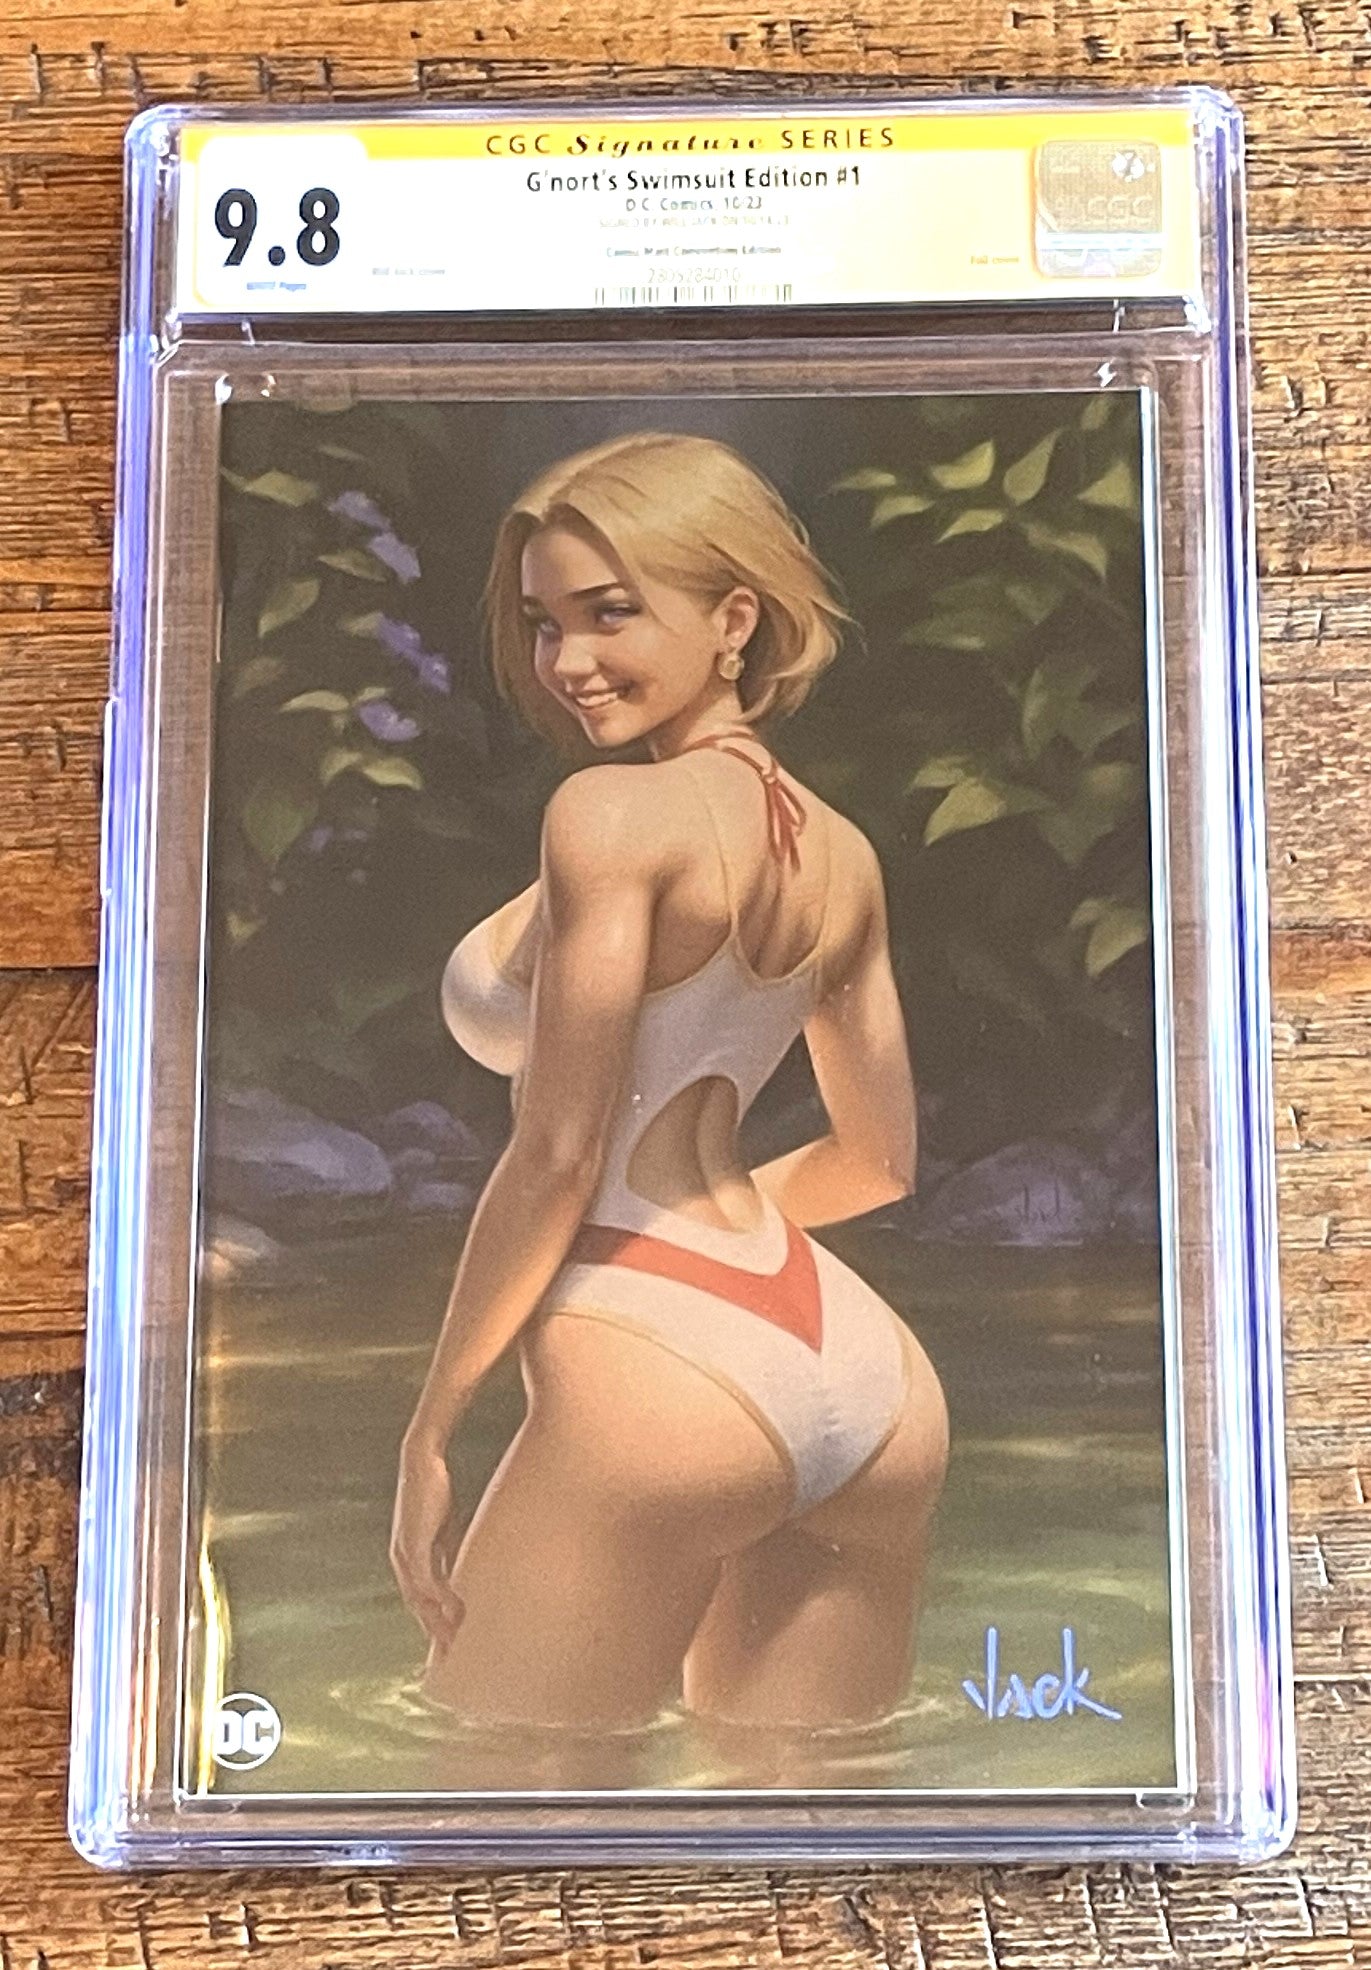 G'NORT'S ILLUSTRATED SWIMSUIT EDITION #1 CGC SS 9.8 WILL JACK SIGNED NYCC EXCL FOIL VARIANT-C